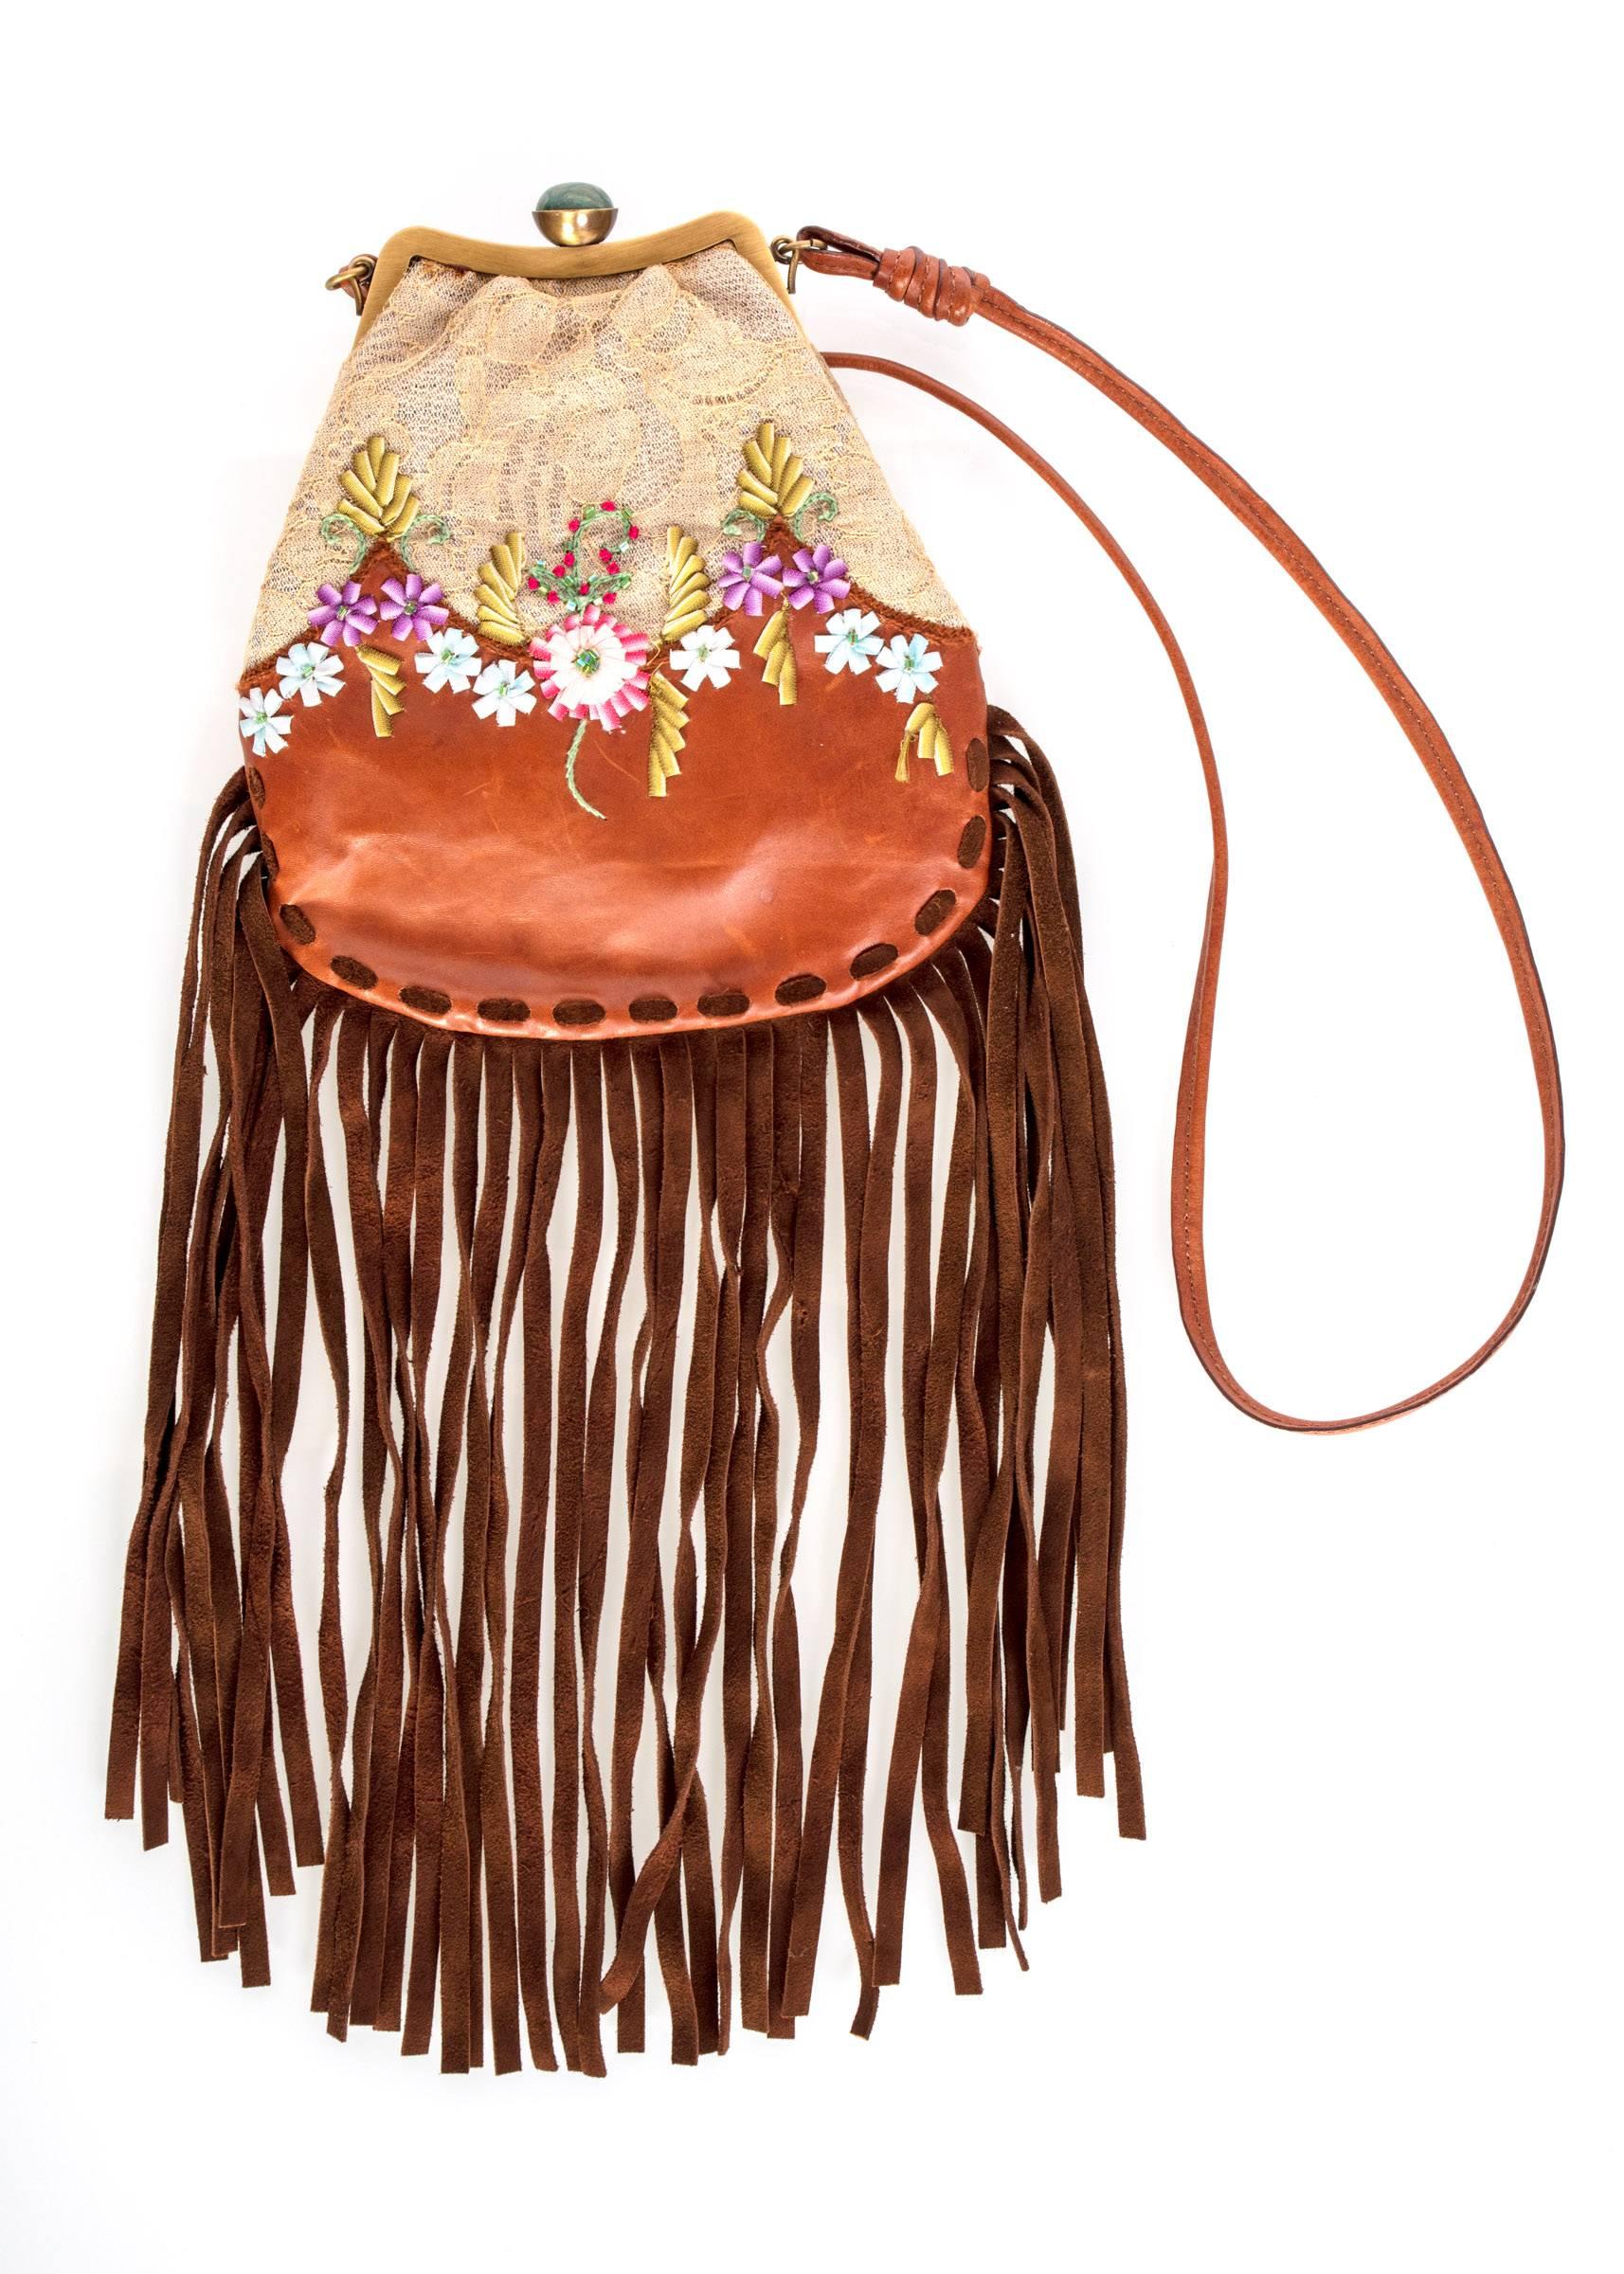 Beige lace and brown leather with embroidered ribbon flowers embellished with beads.
The top of the purse is framed in a brass colored metal with colorful enameled flowers. 
The clasp is set with a polished green stone. The shoulder strap is leather